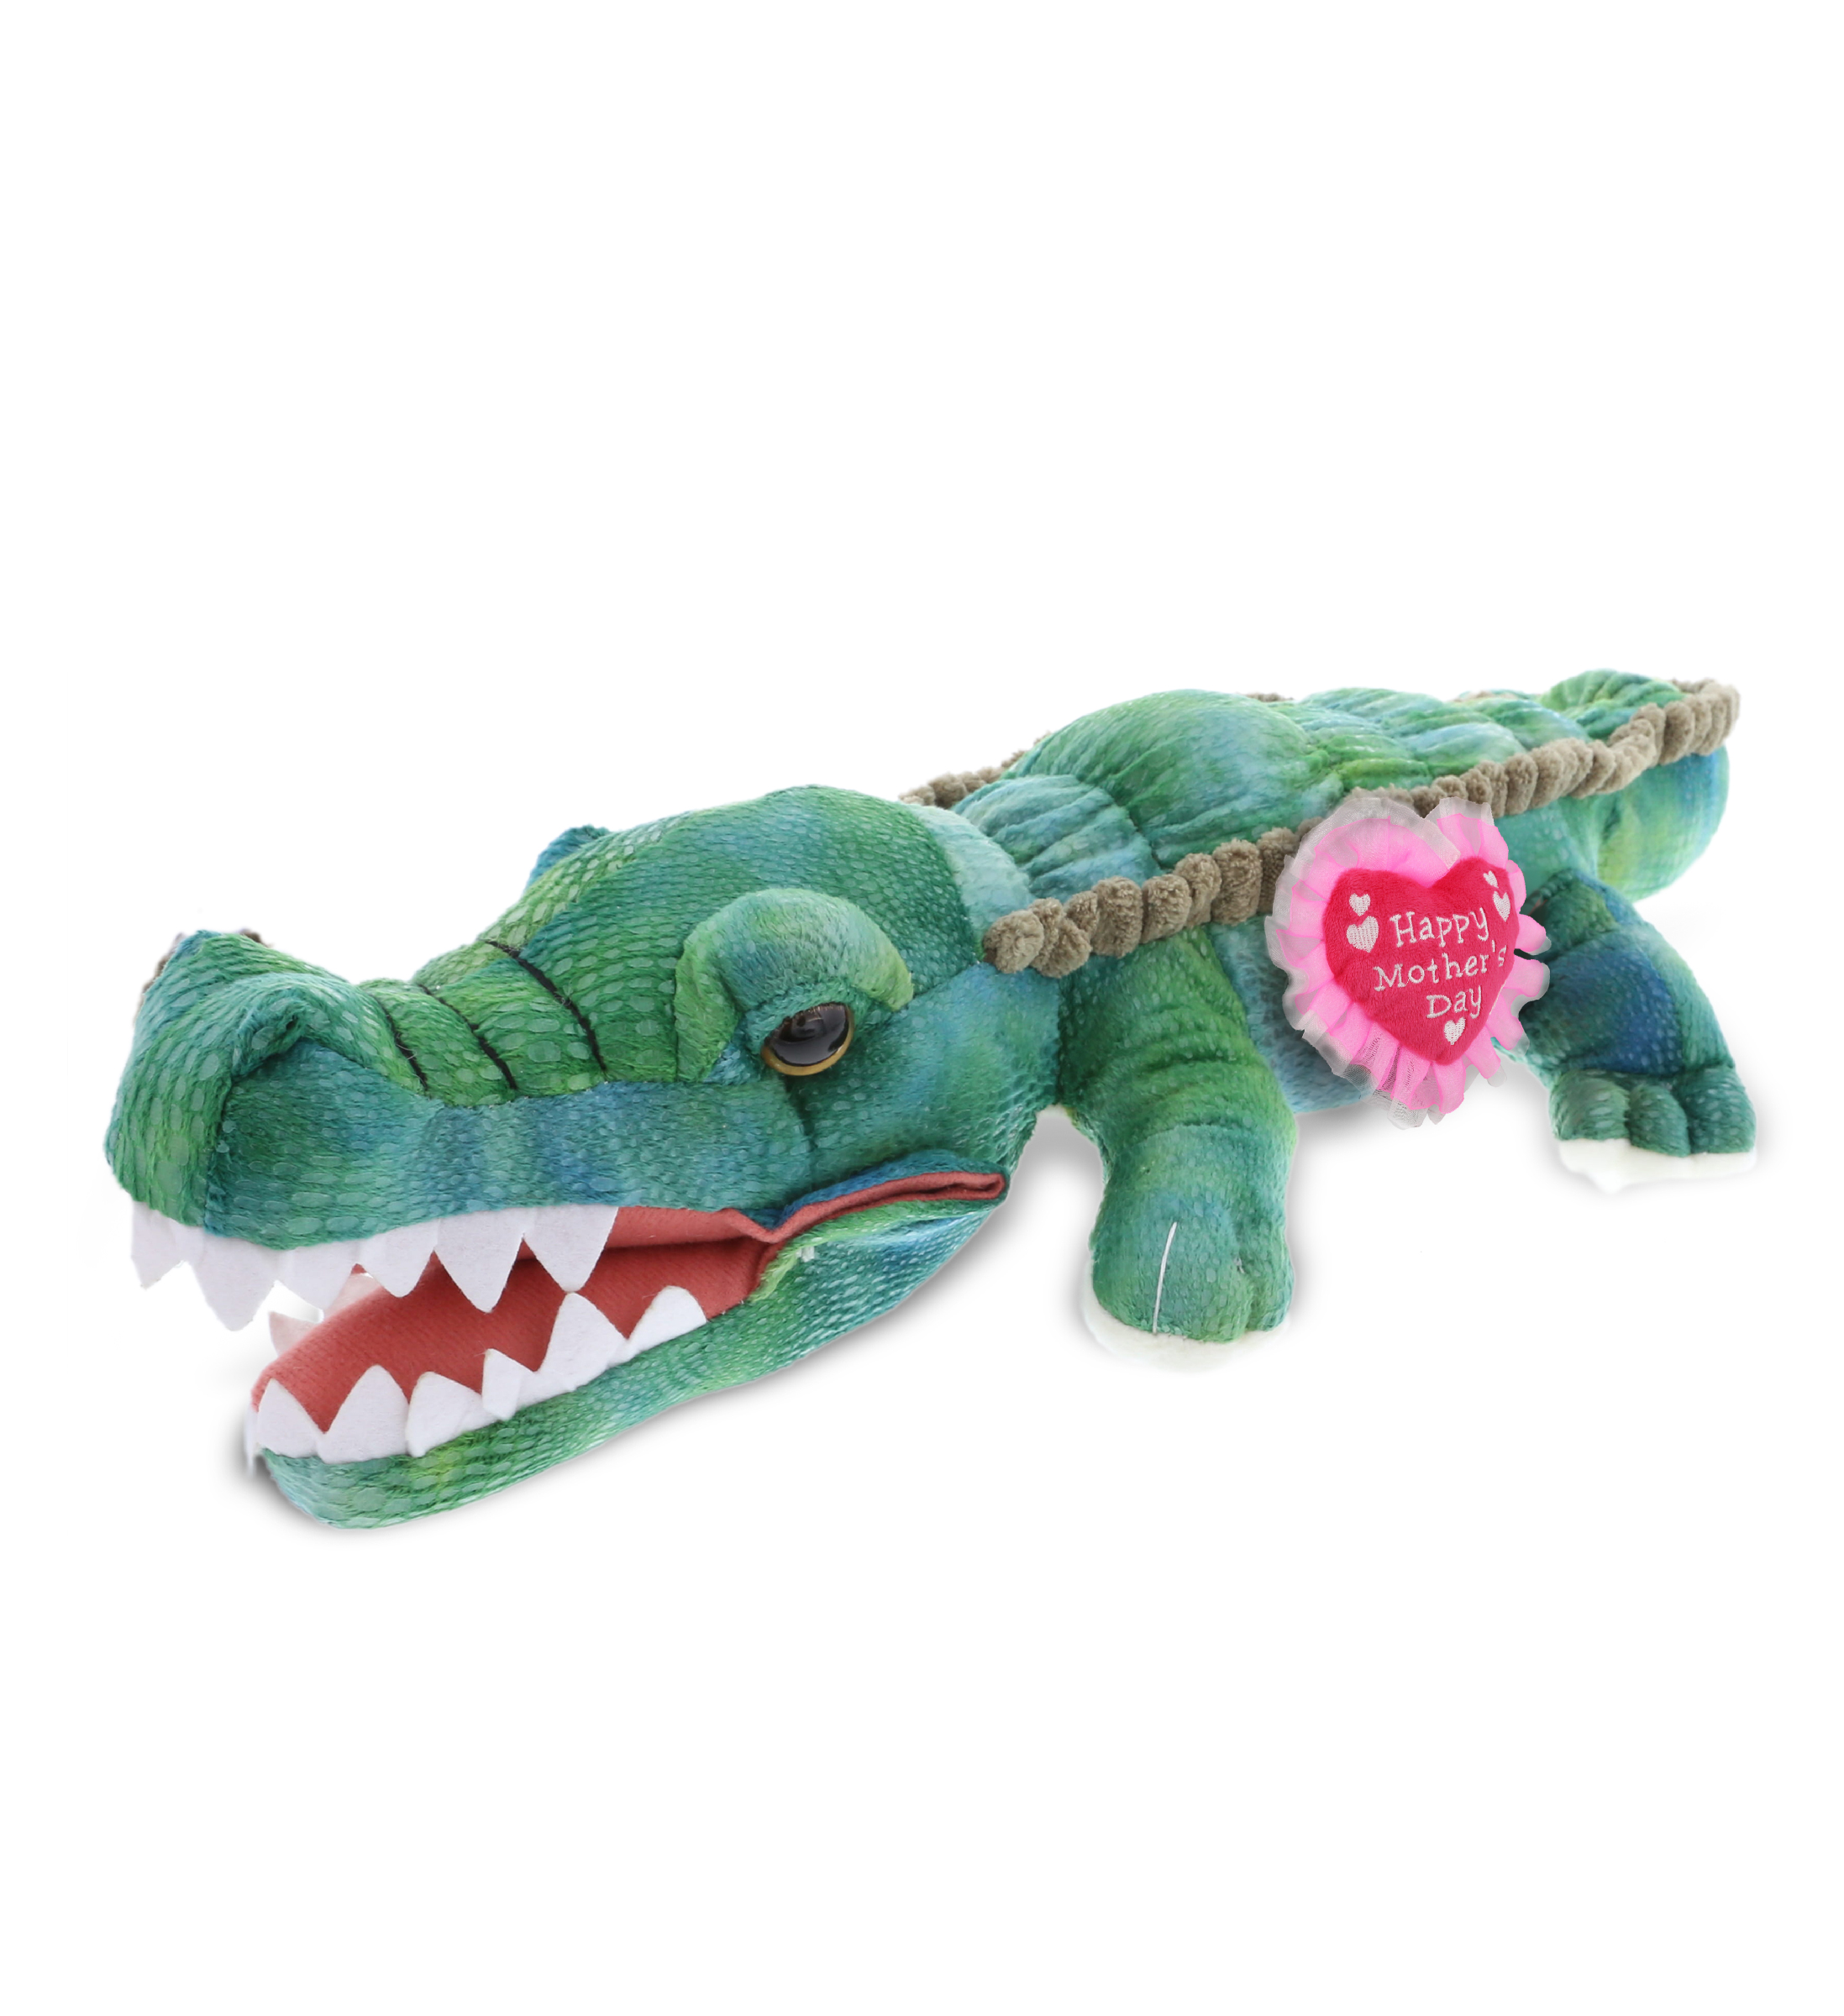 DolliBu Happy Mother's Day Wild Collection Plush Alligator with Pink Heart 24" 